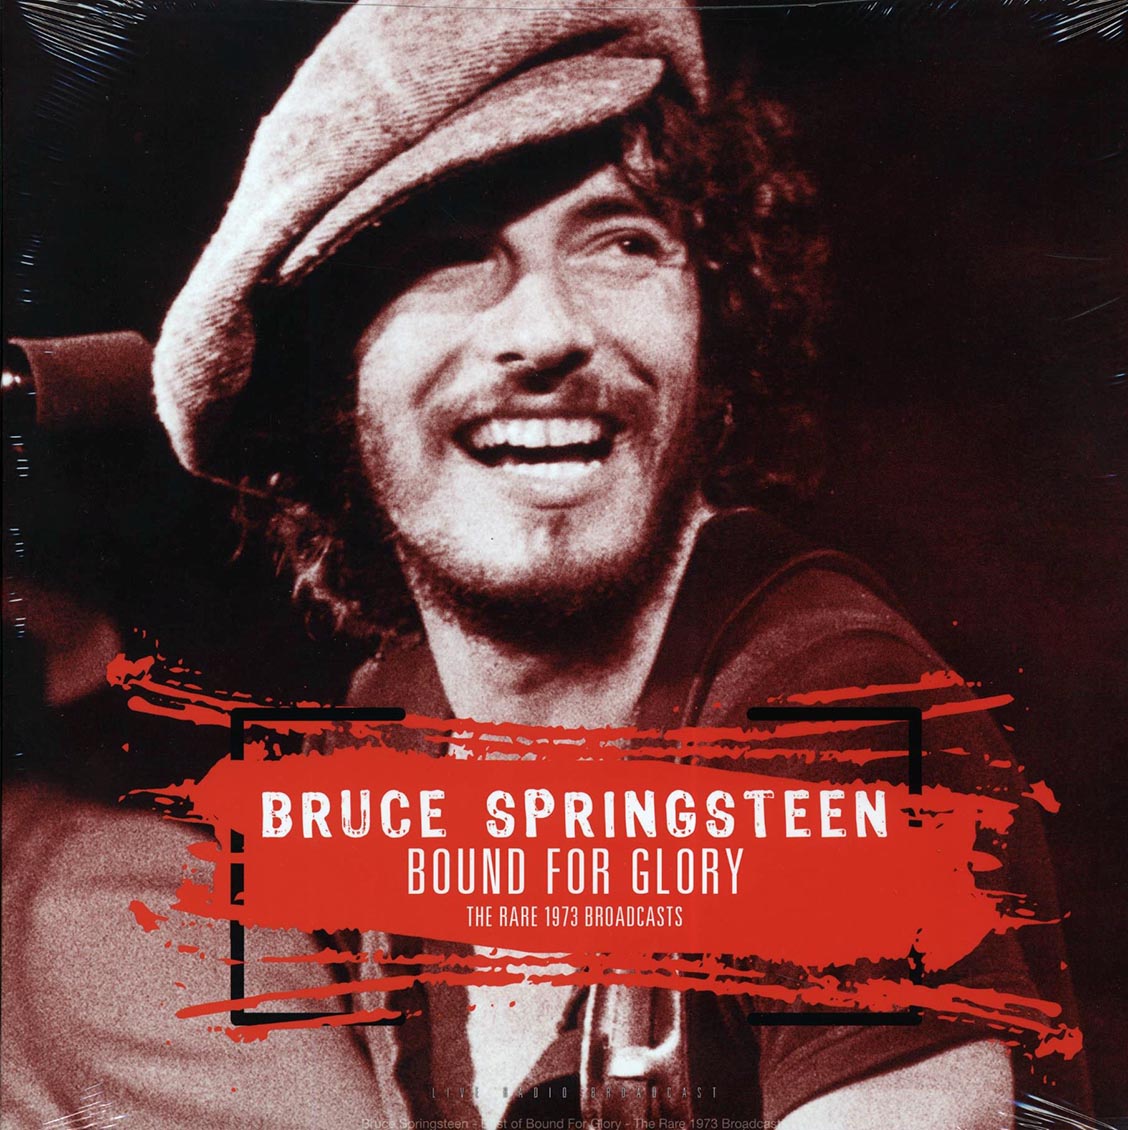 Bruce Springsteen - Bound For Glory: The Rare 1973 Broadcasts